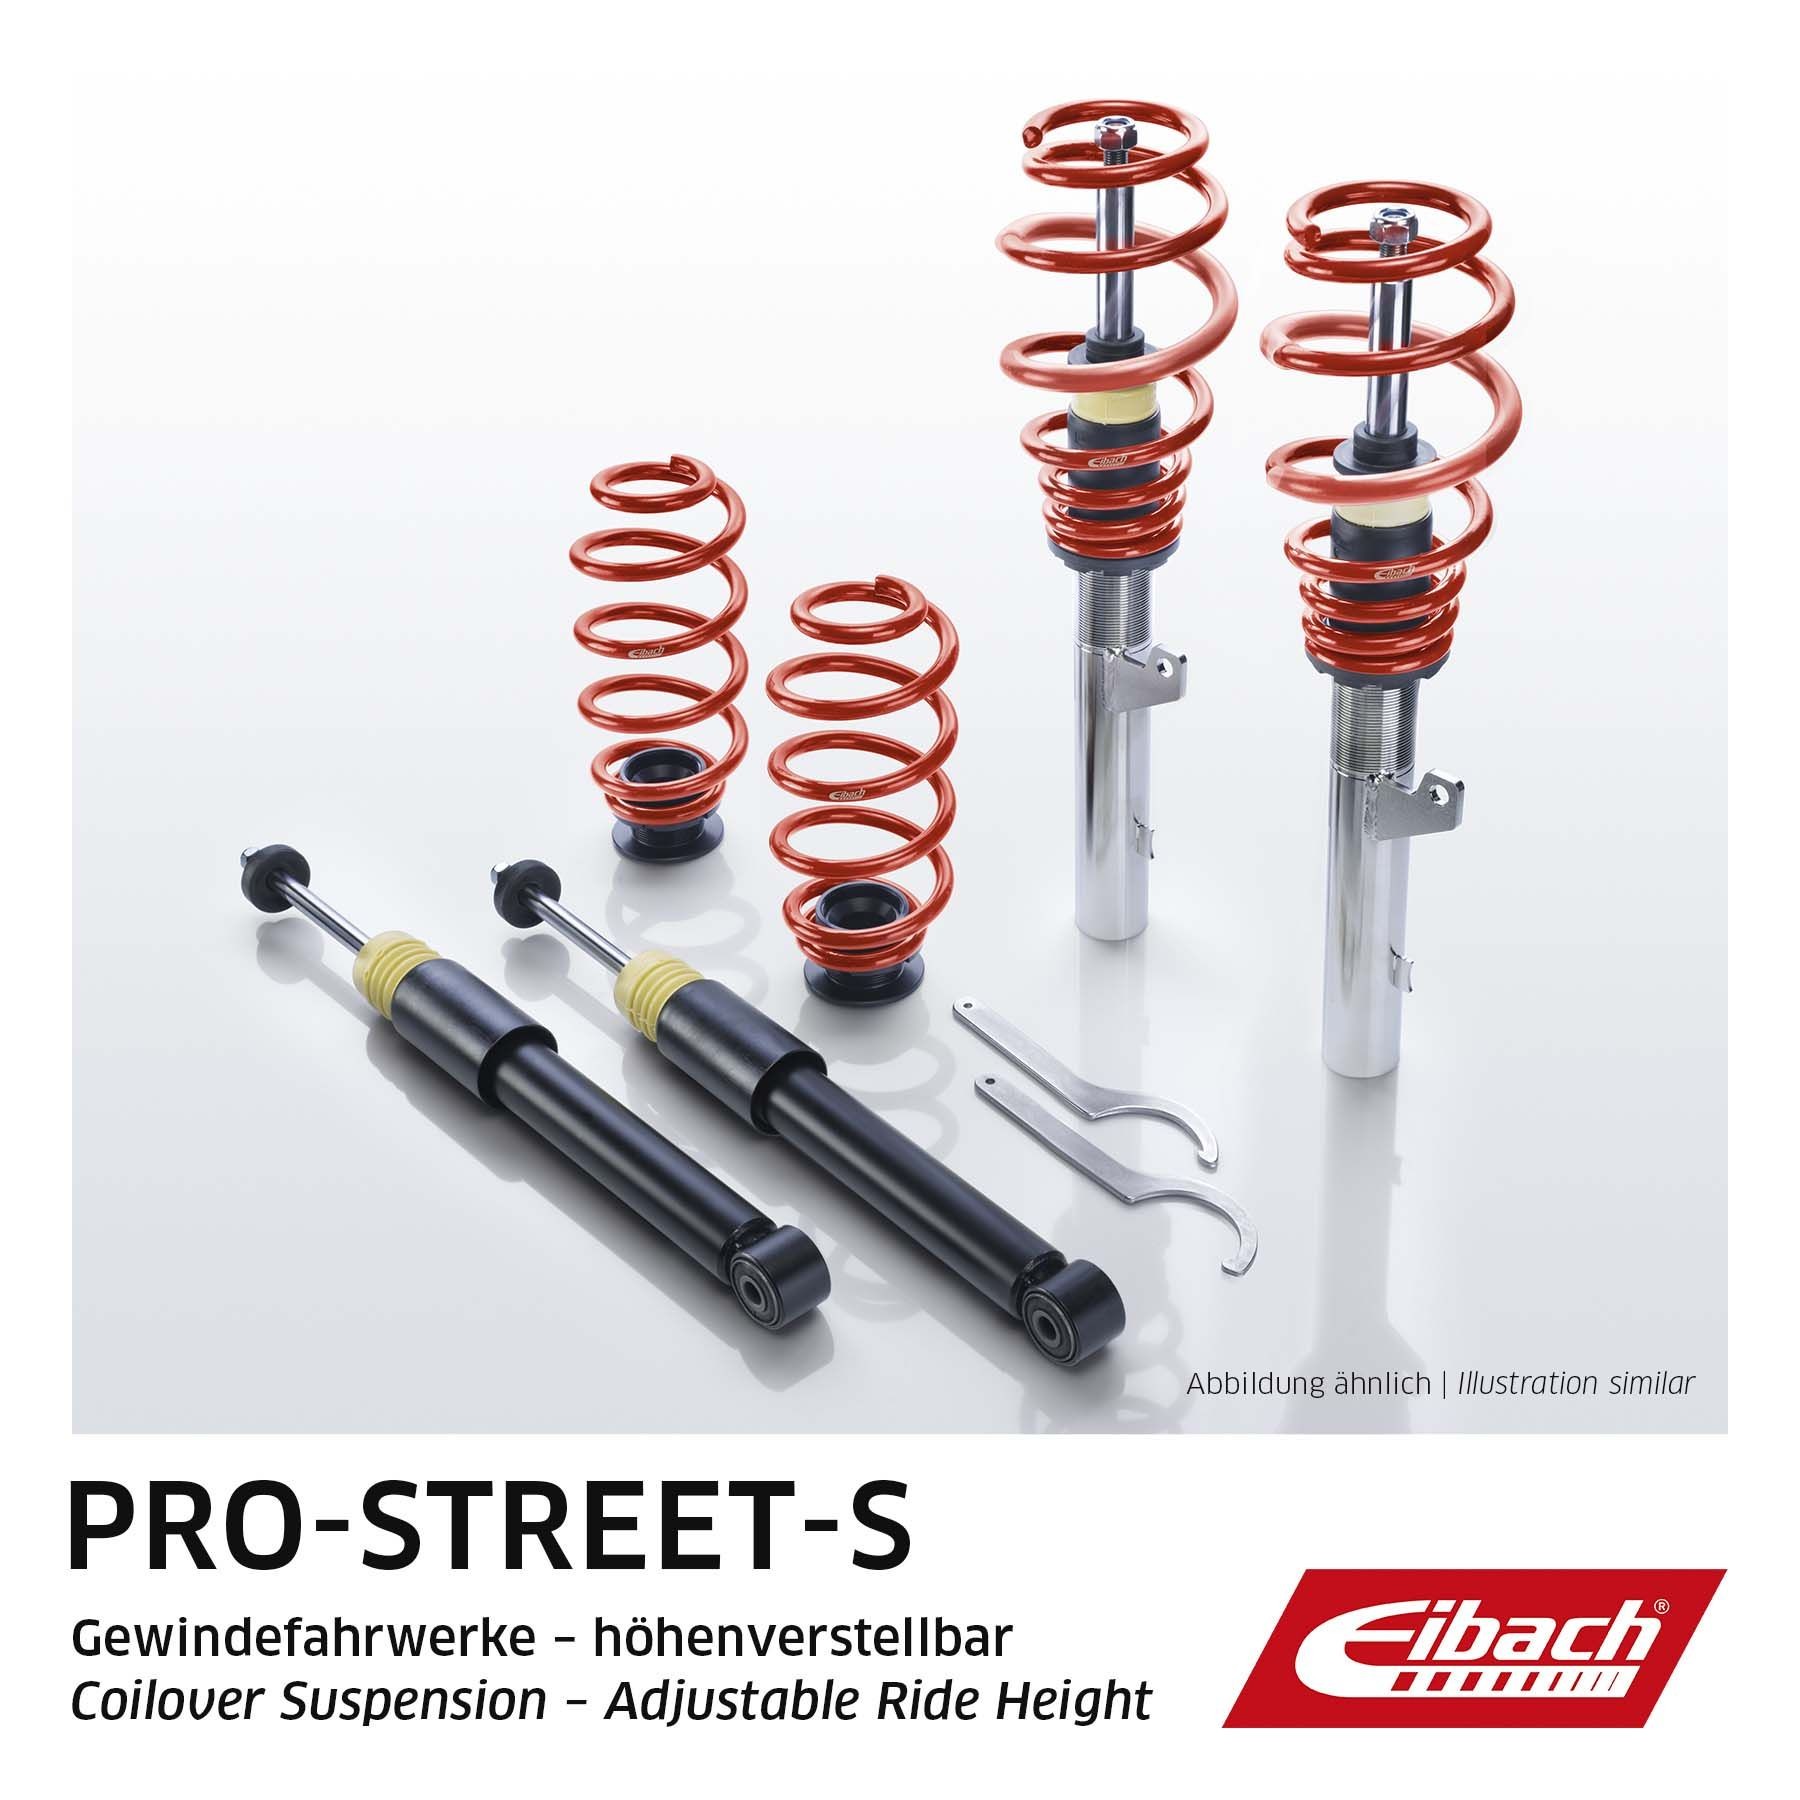 EIBACH PSS65-65-020-01-22 CHEVROLET Suspension kit, coil springs / shock absorbers